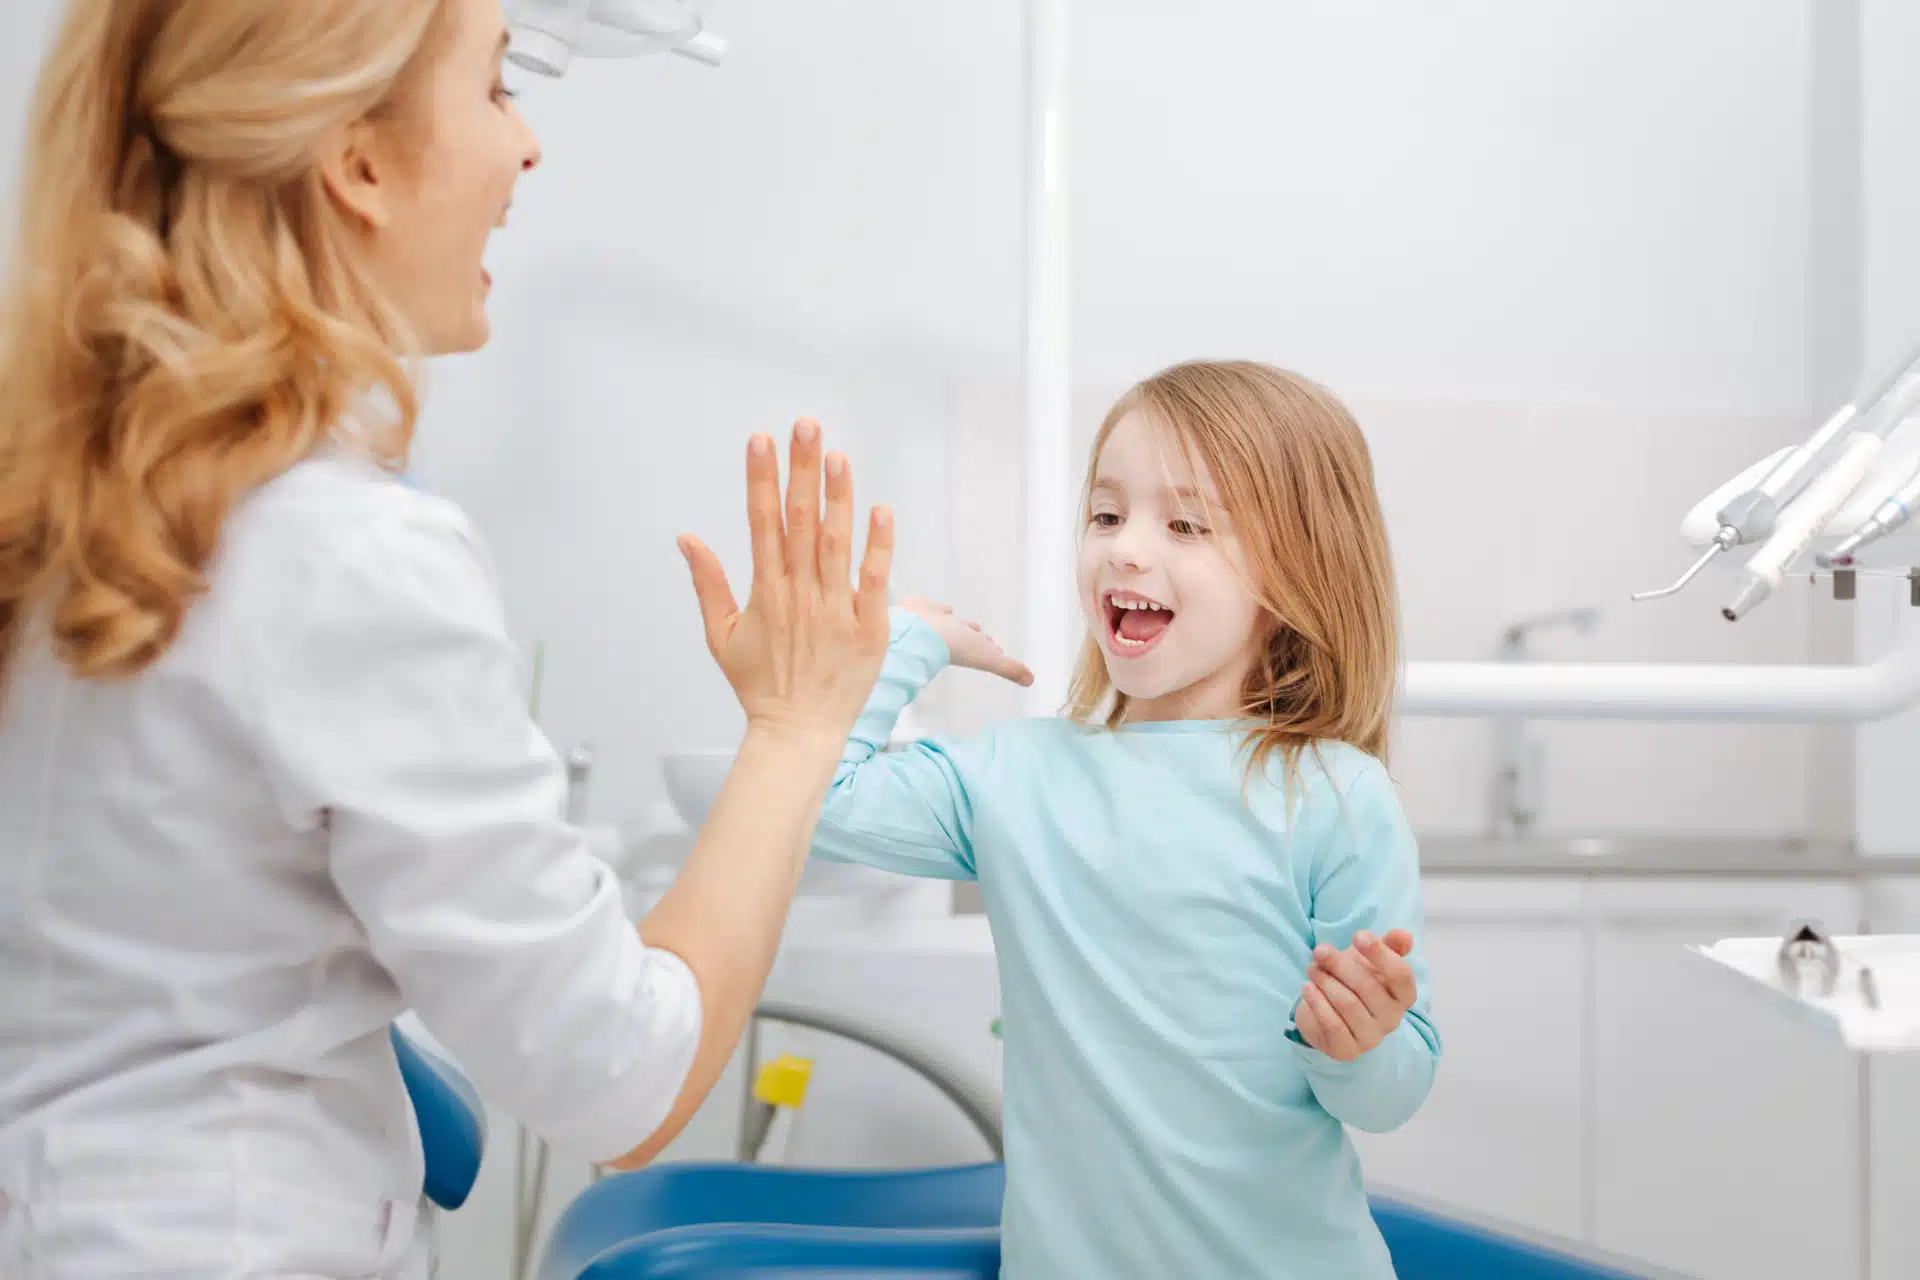 Our comprehensive pediatric care includes routine check-ups, cleanings, and preventive treatments tailored to your child's unique needs.